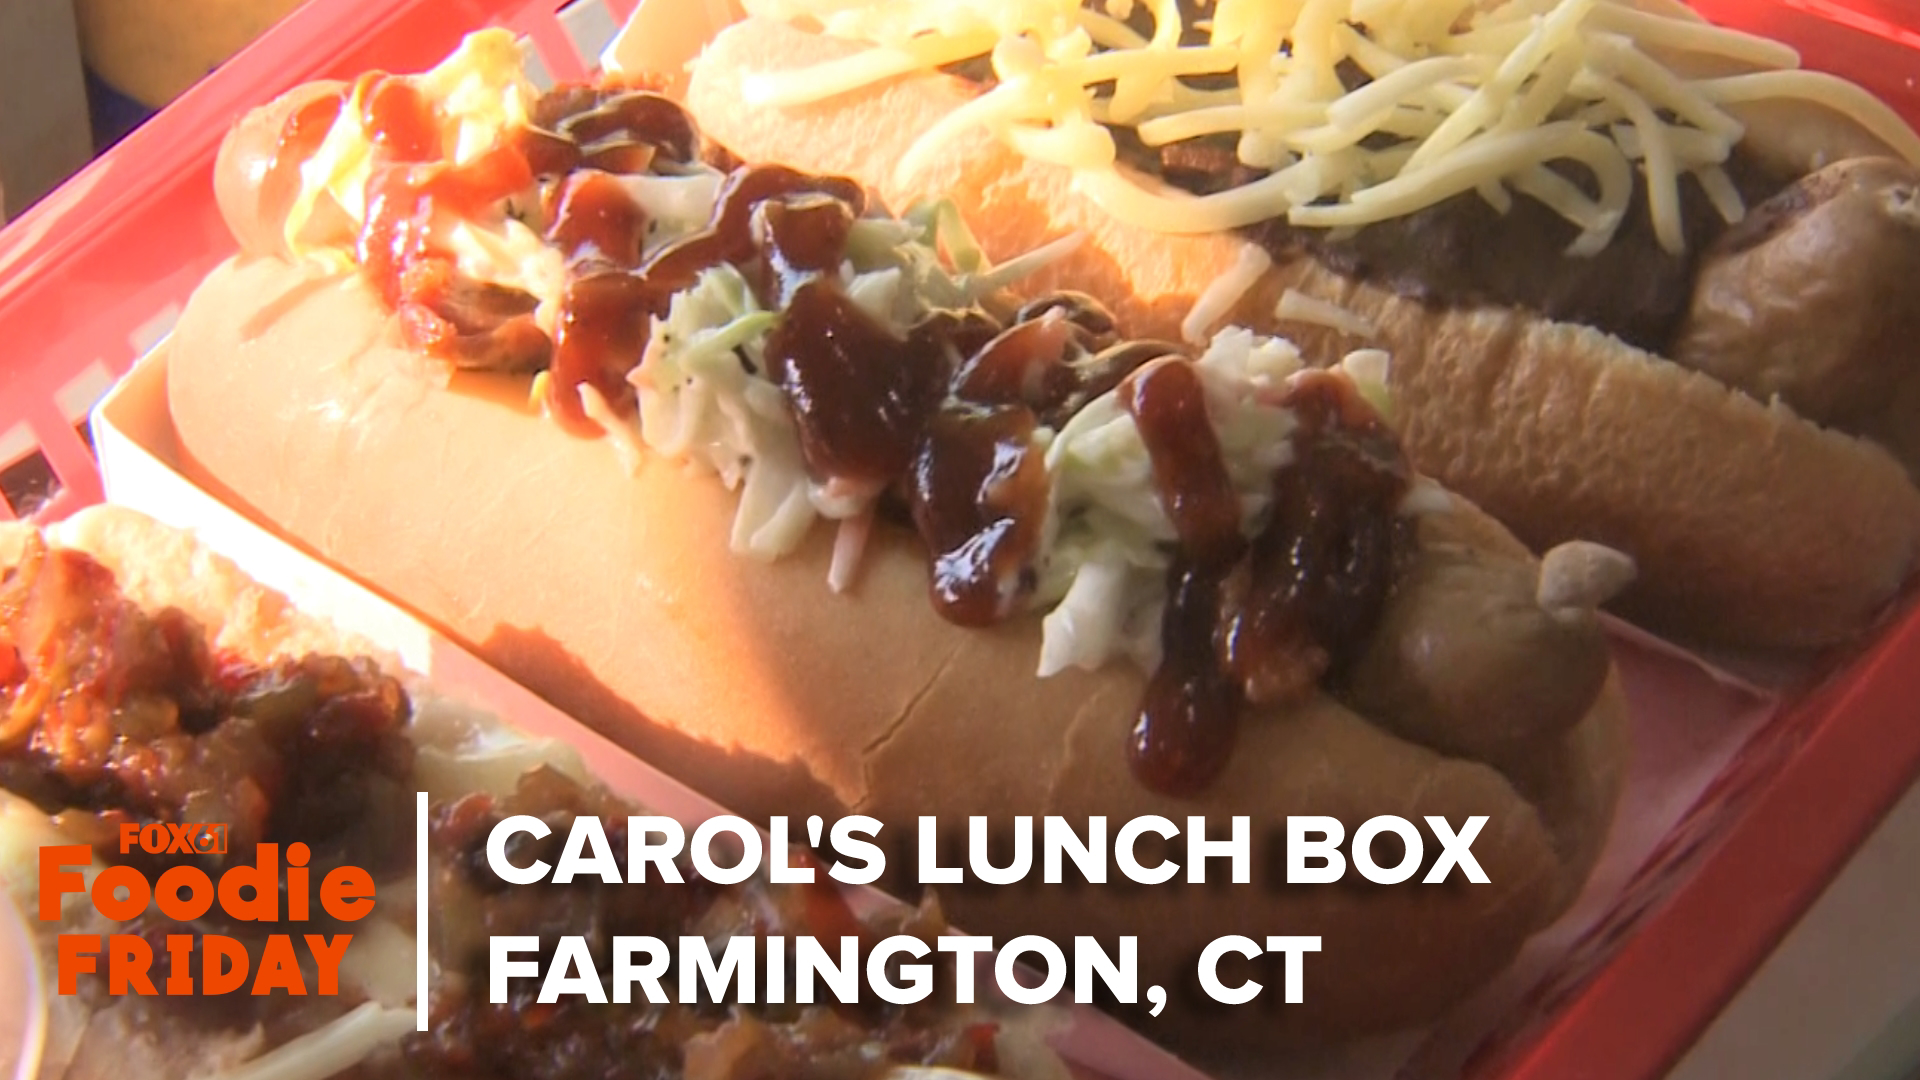 This Foodie Friday, FOX61's Rachel Piscitelli visited Carol's Lunch Box in Farmington to sample their array of hotdogs with classic and creative toppings.